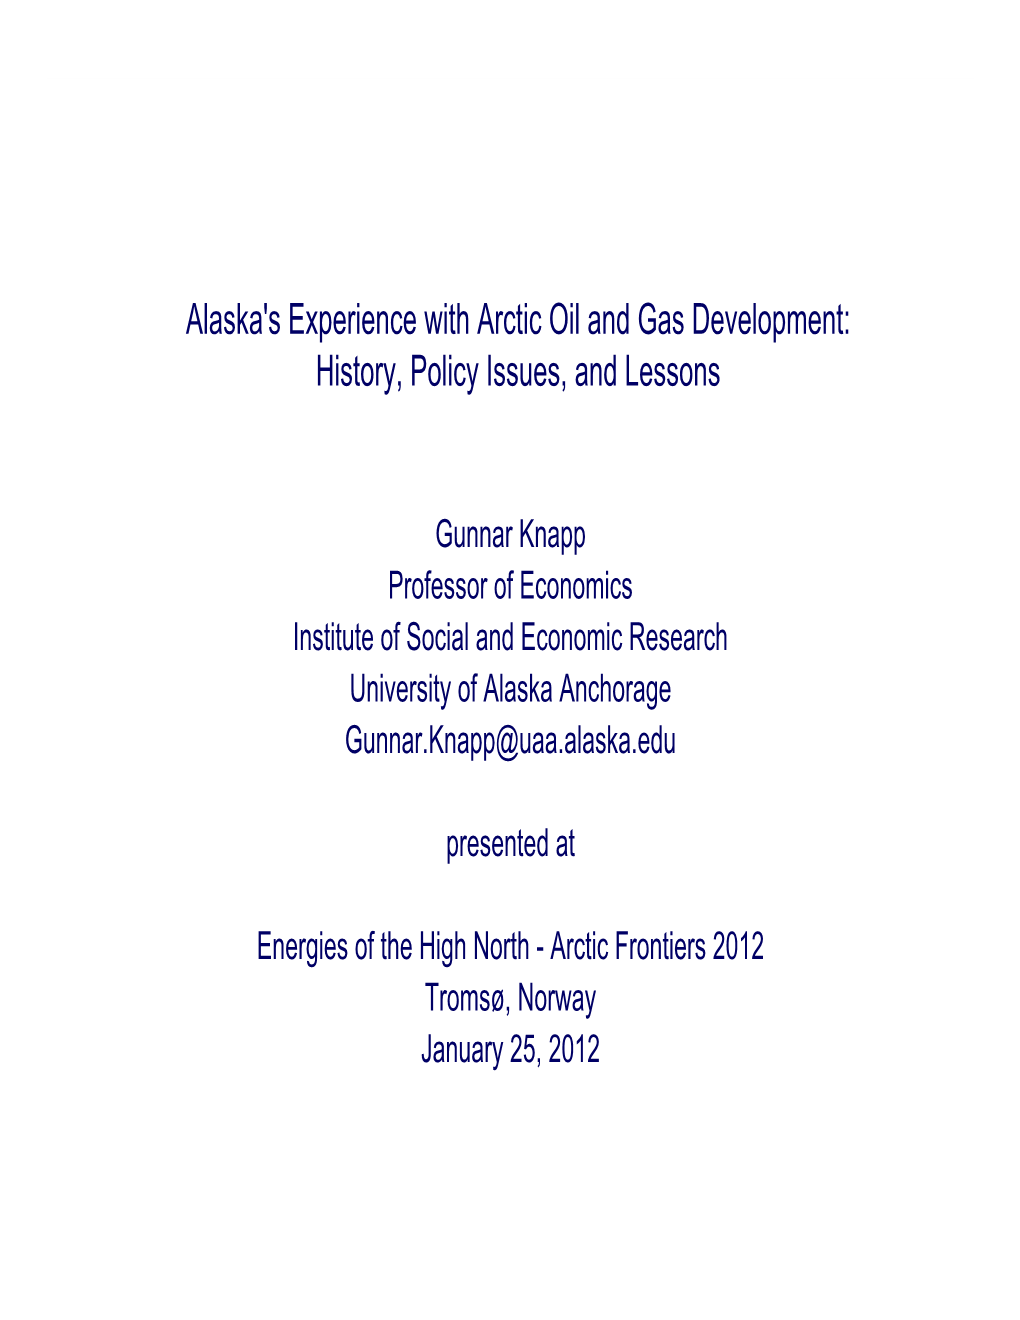 Alaska's Experience with Arctic Oil and Gas Development: History, Policy Issues, and Lessons